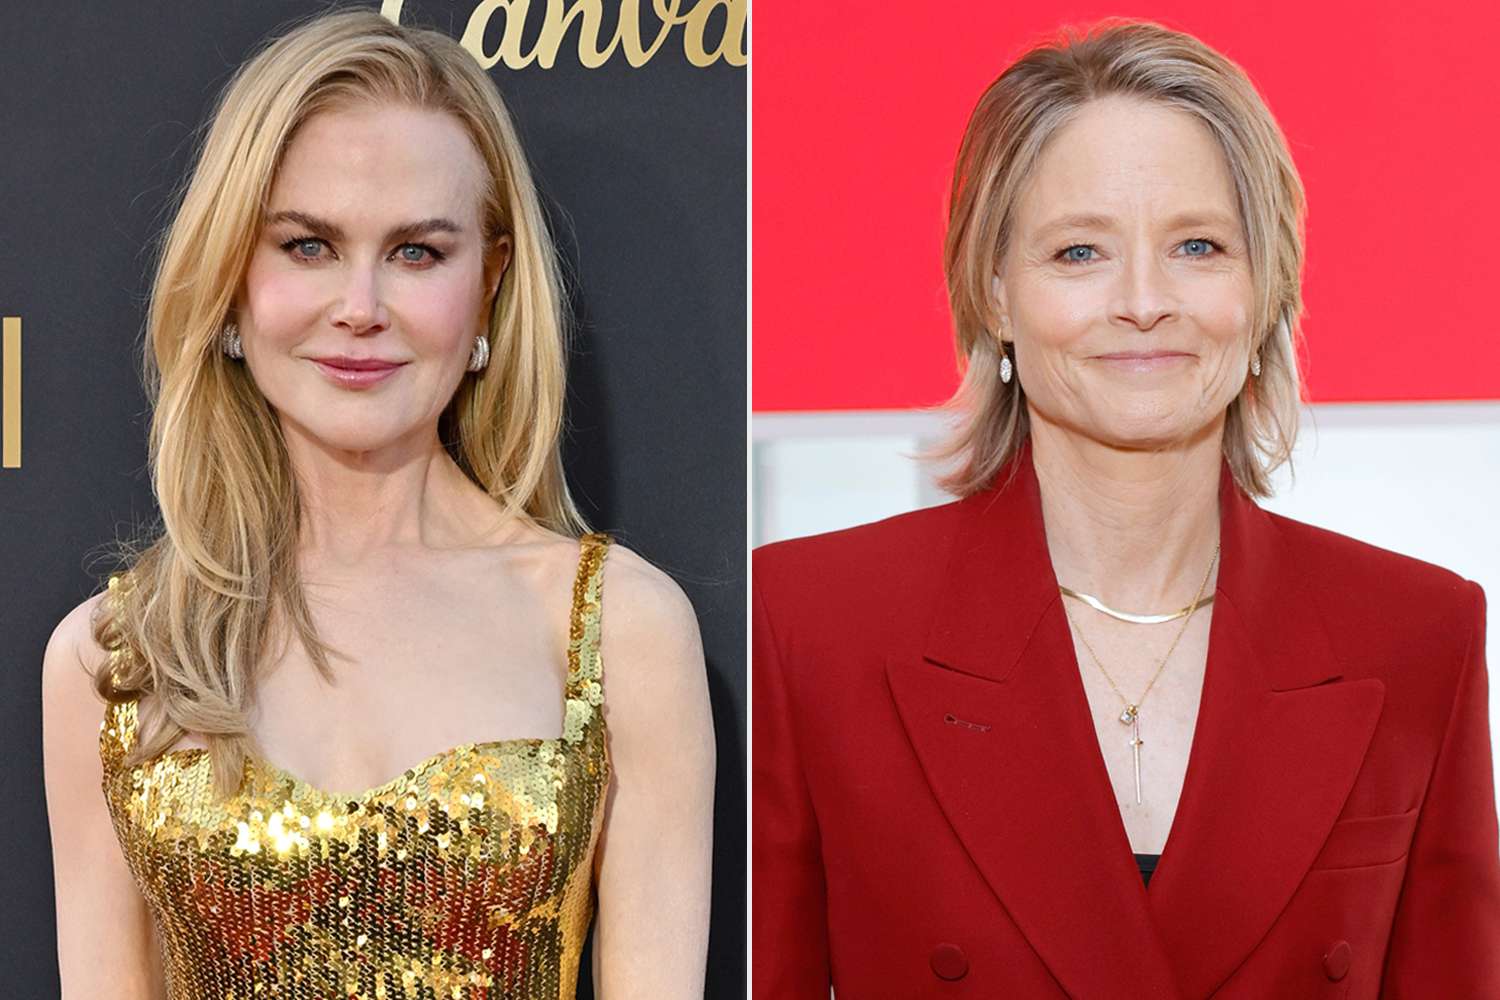 Nicole Kidman Thanks Jodie Foster for Replacing Her in “Panic Room” When She Was 'in a Really Bad Way'